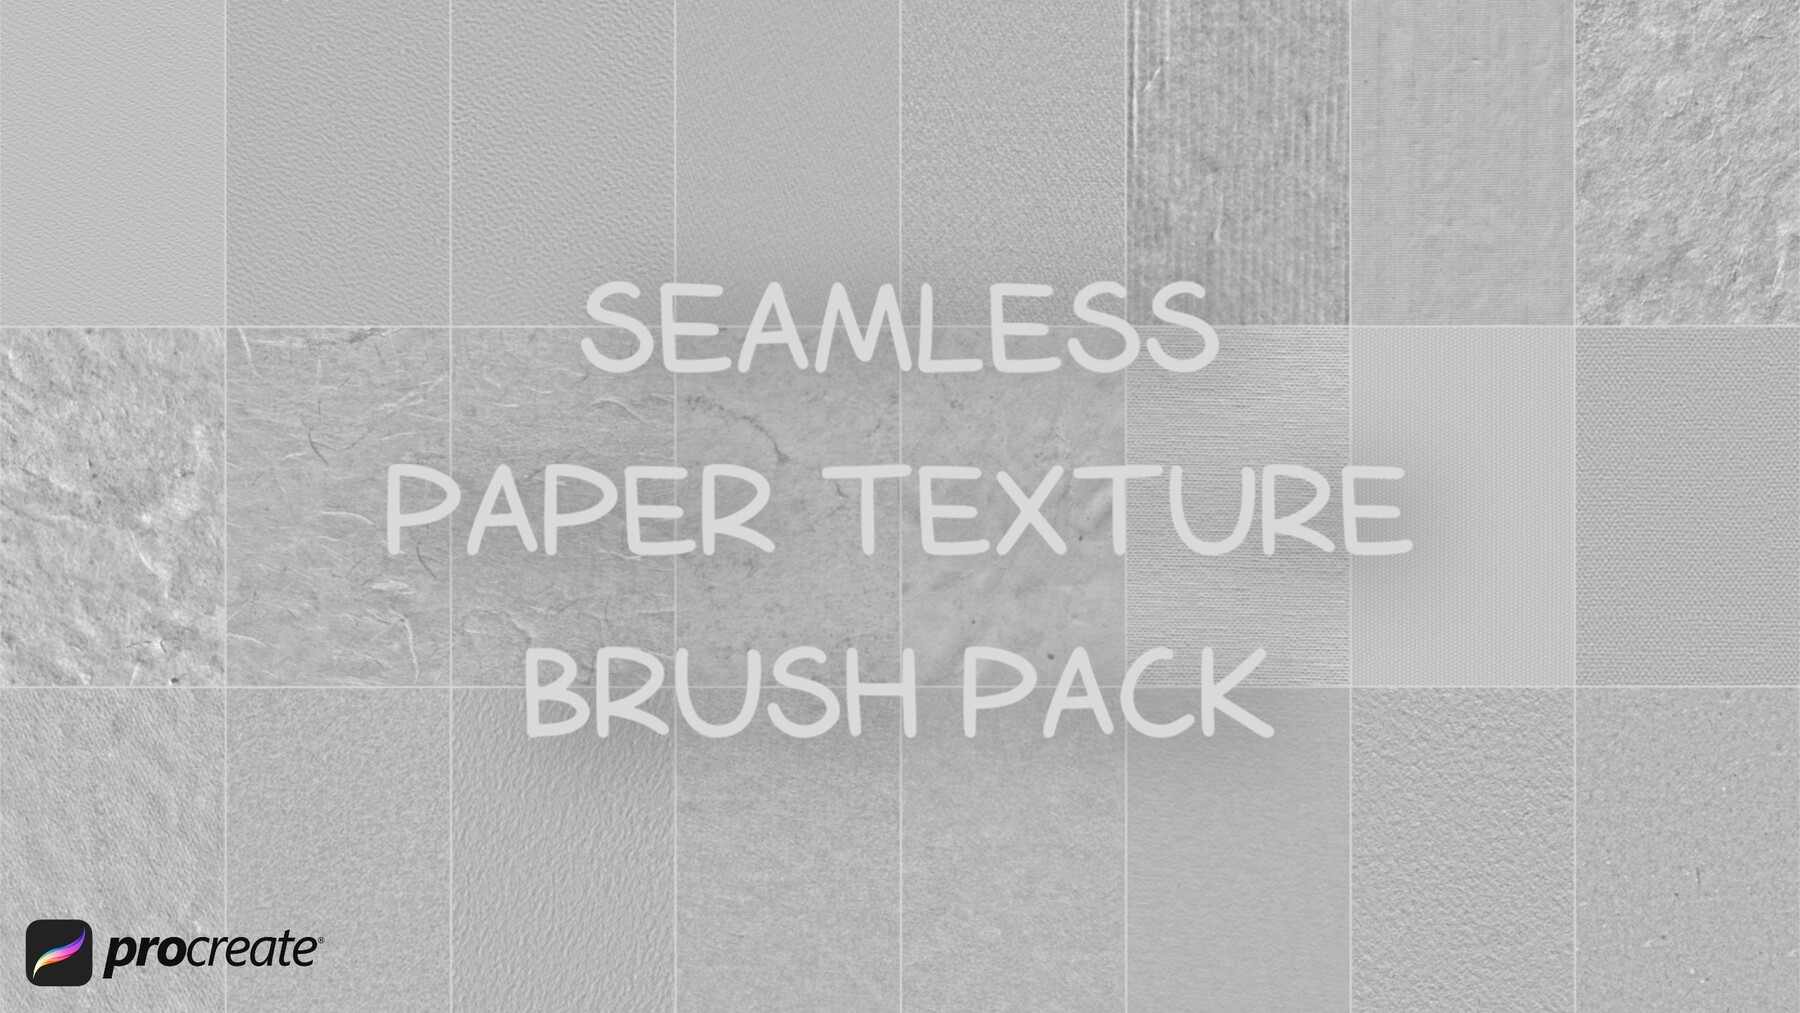 A seamless texture of gouache paper, seamless texture, black and